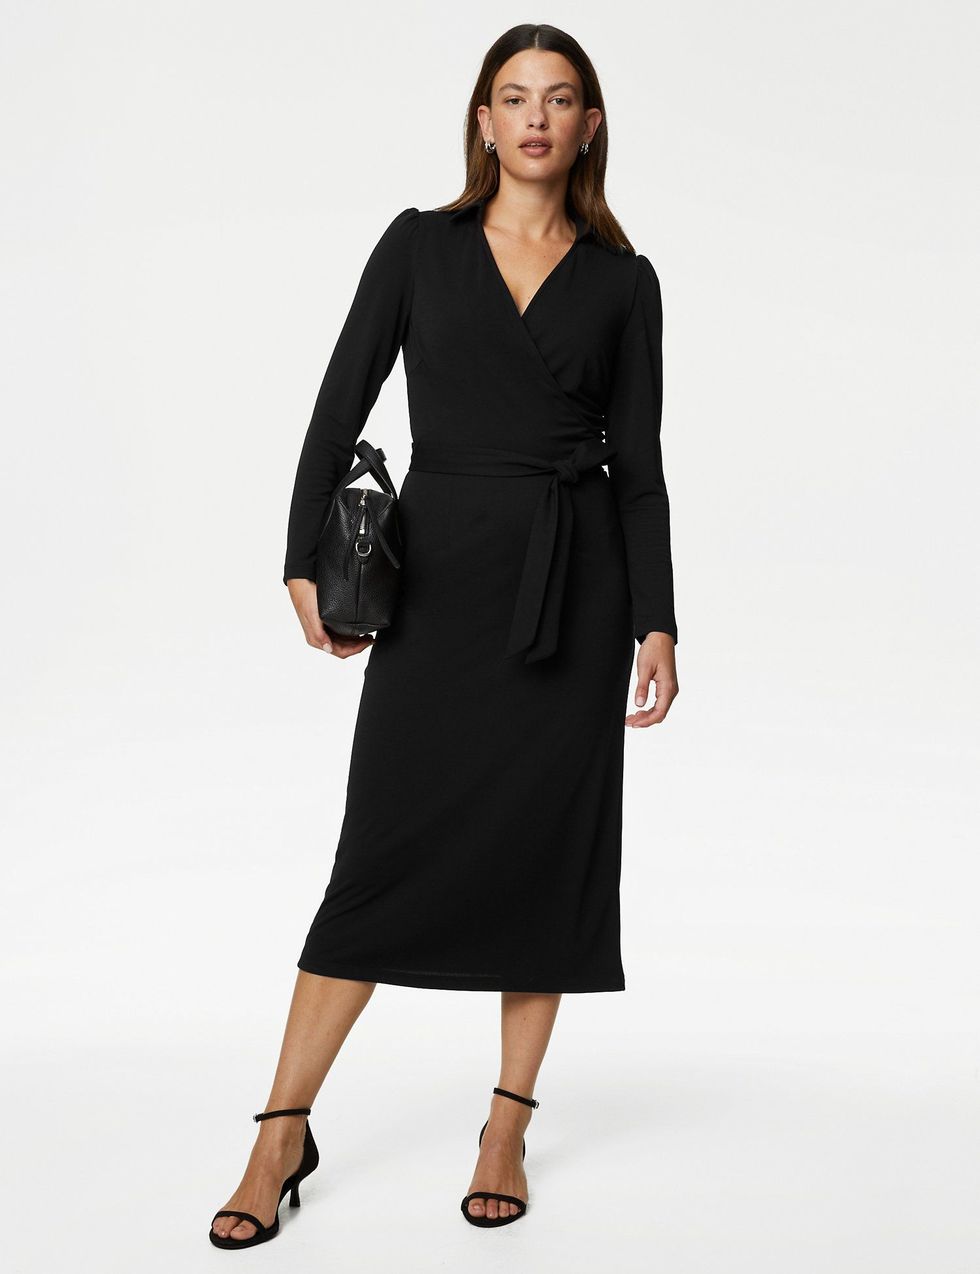 M&S just dropped the perfect £39 spring midi dress and I could totally see  Kate Middleton wearing it